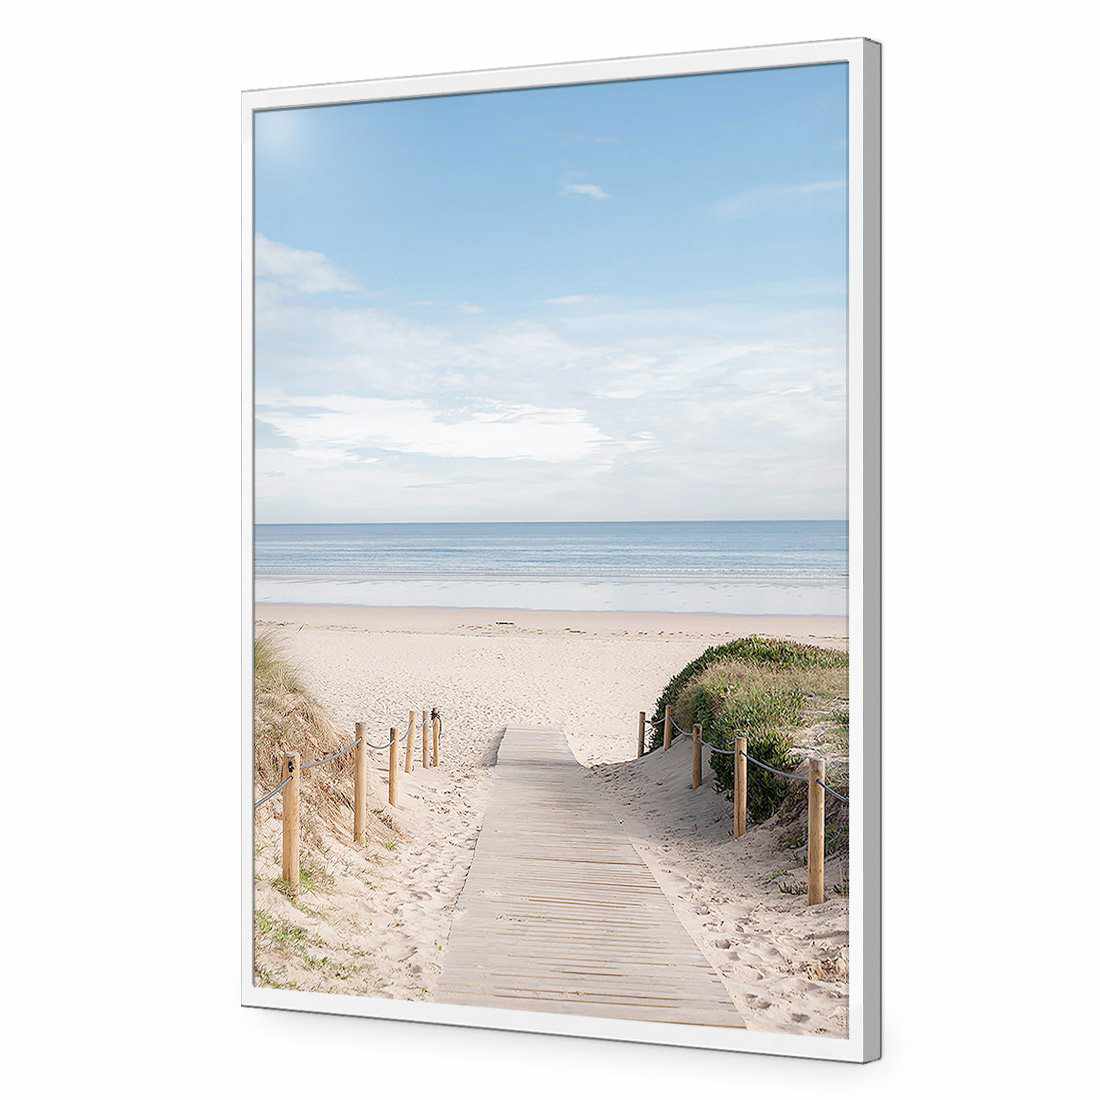 Pathway To The Sea-Acrylic-Wall Art Design-Without Border-Acrylic - White Frame-45x30cm-Wall Art Designs